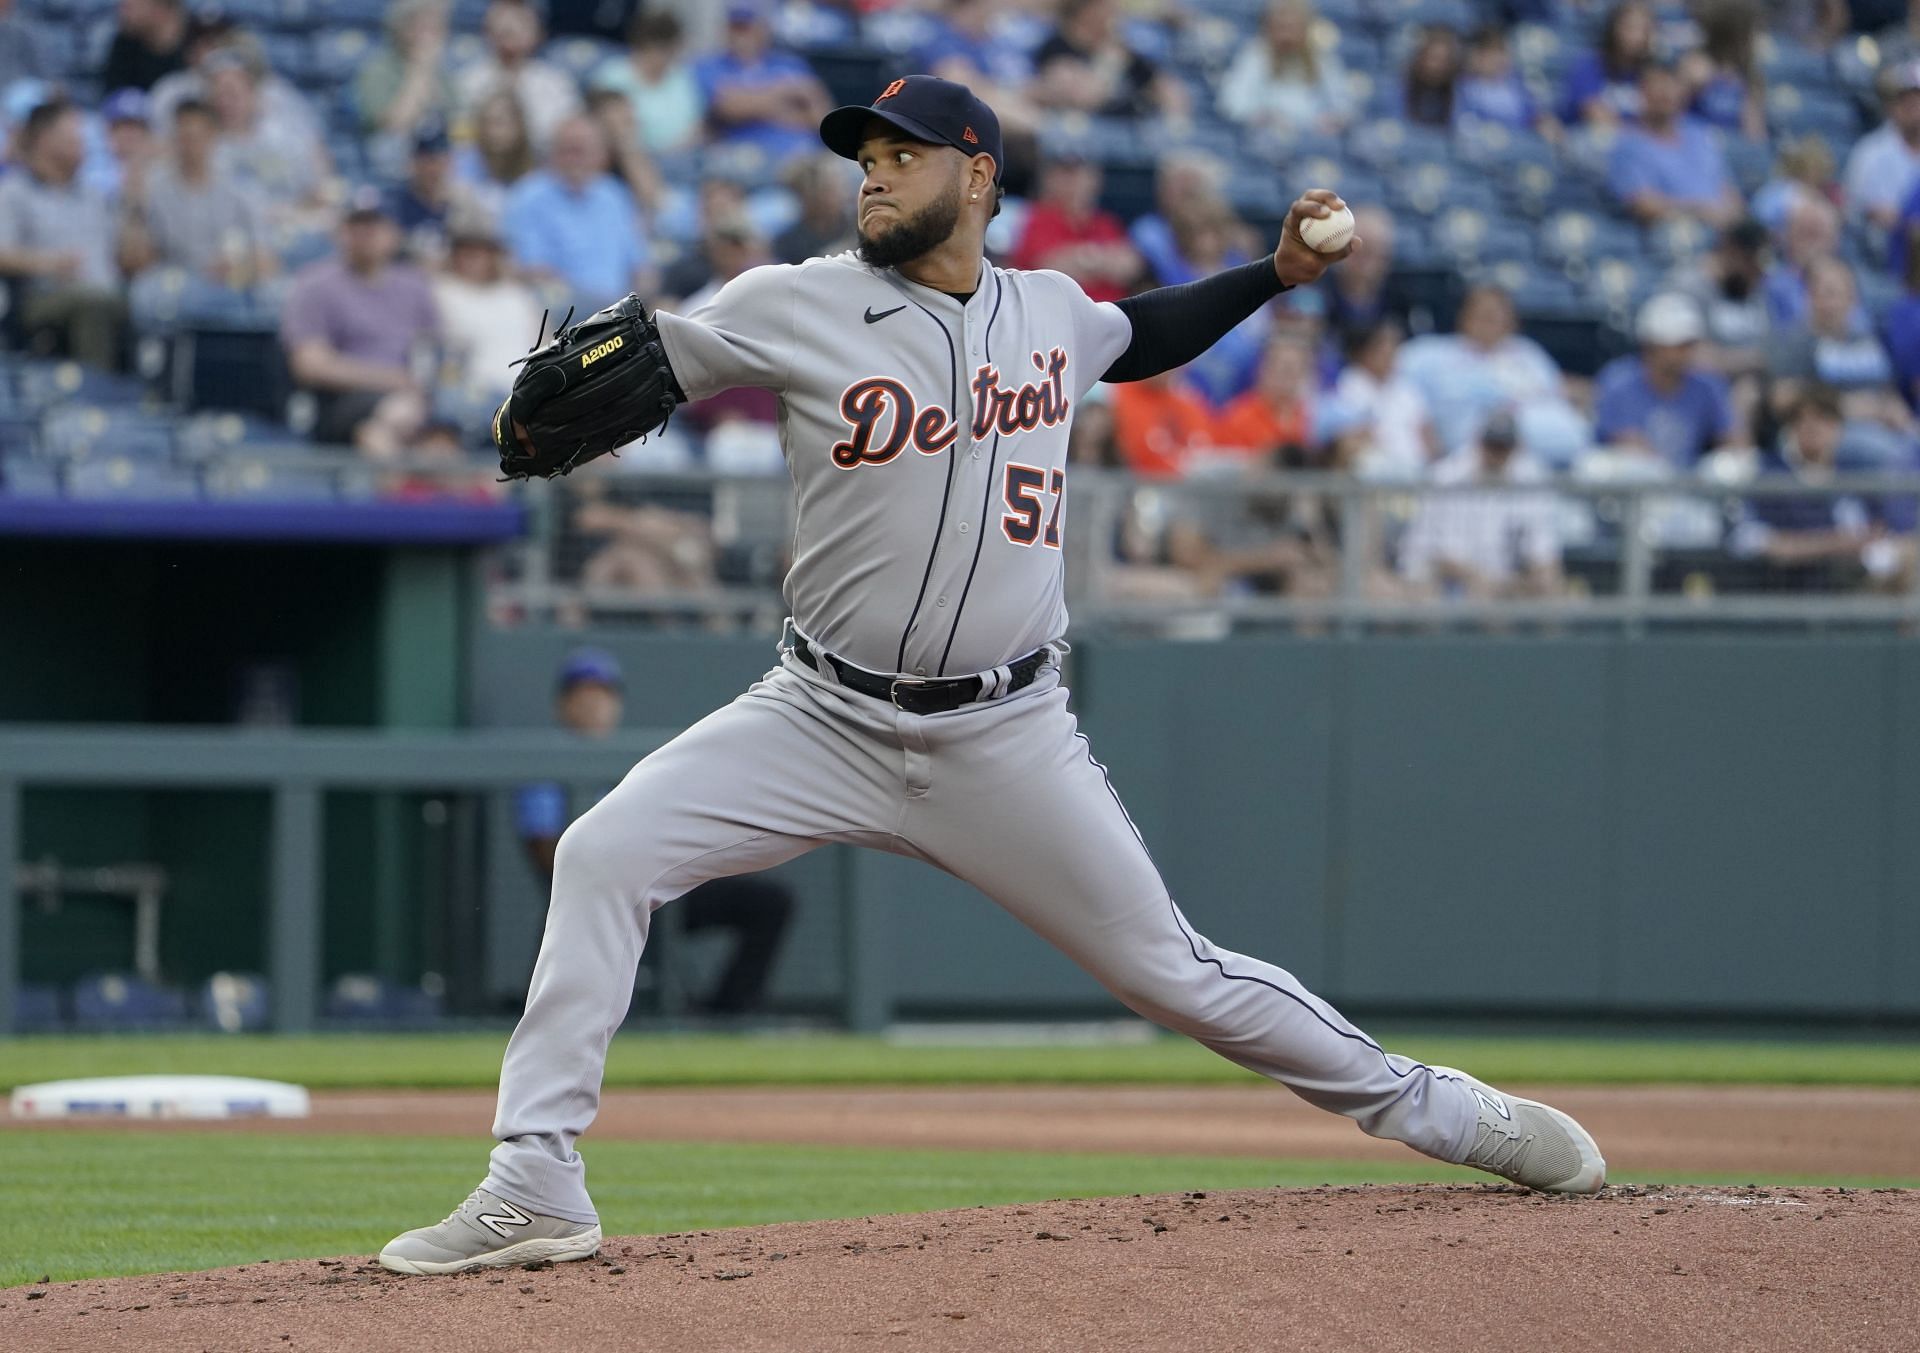 Rodriguez has had a breakout season and could provide rotation stability.